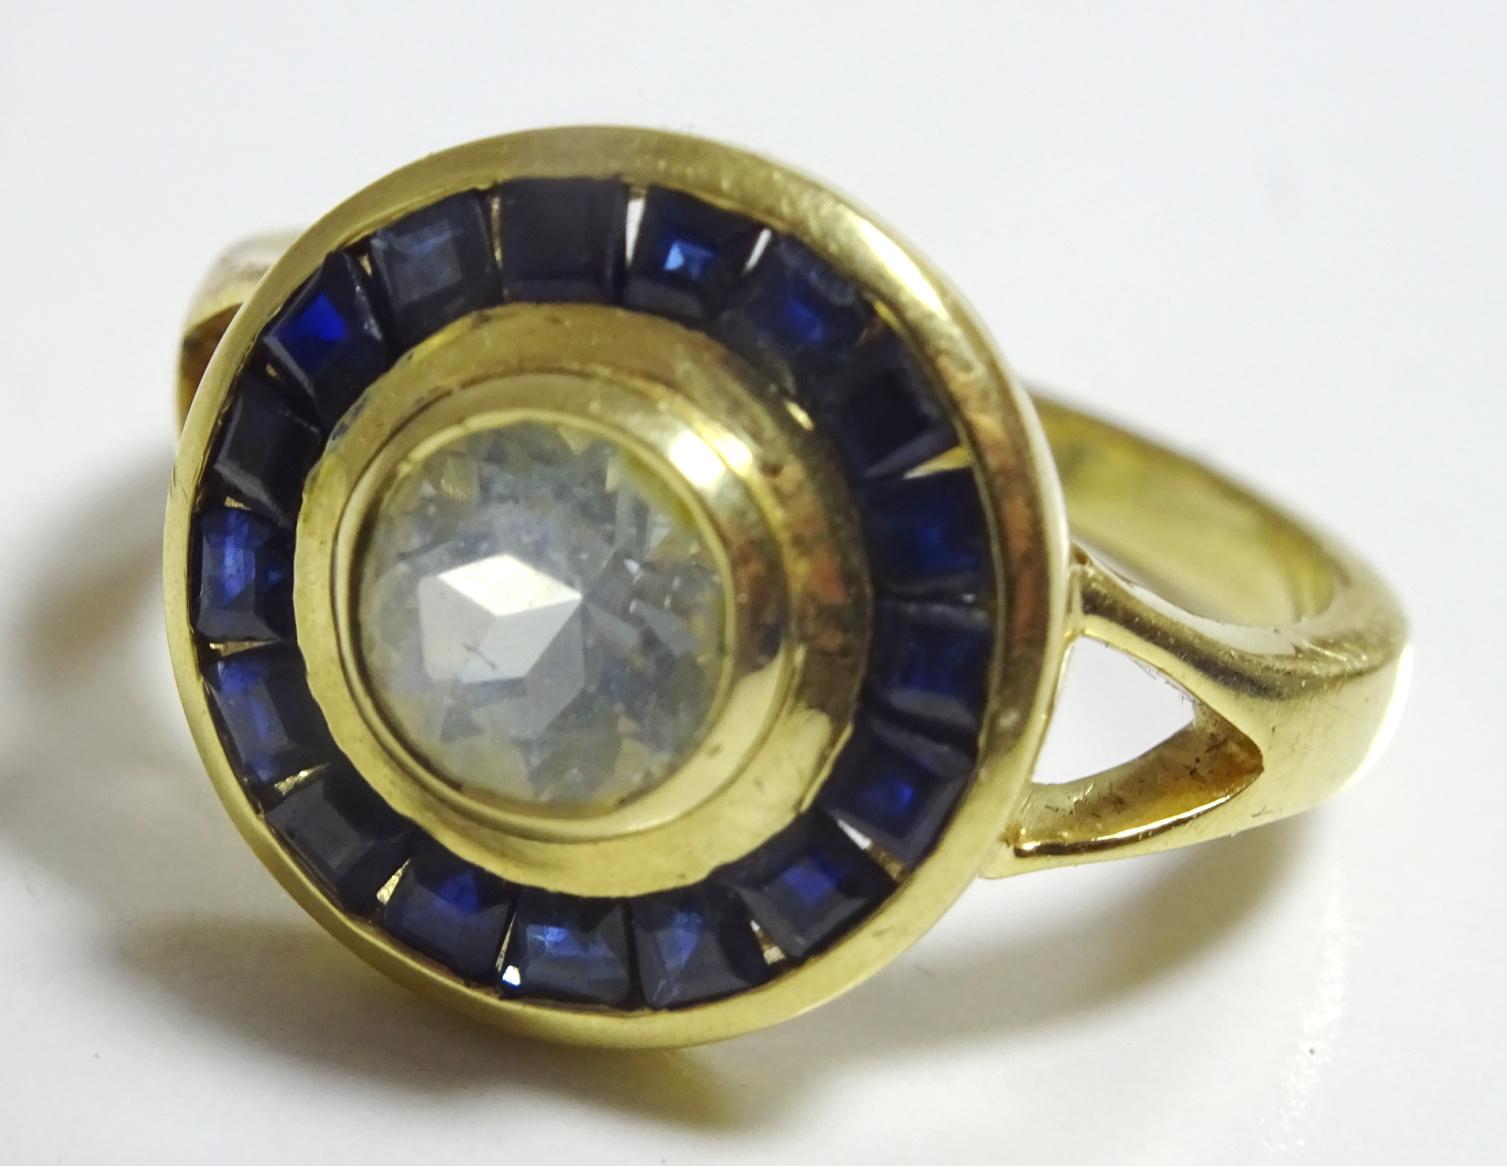 A Beautiful Handcrafted Ring made in 18 karat Gold ( there is a clear hallmark ) The Centre stone is a 8 mm round pale blue Aquamarine weighing 1.5 carats. This stone is surronded by 20 2 mm square Sapphires in a channel setting, total carat weight